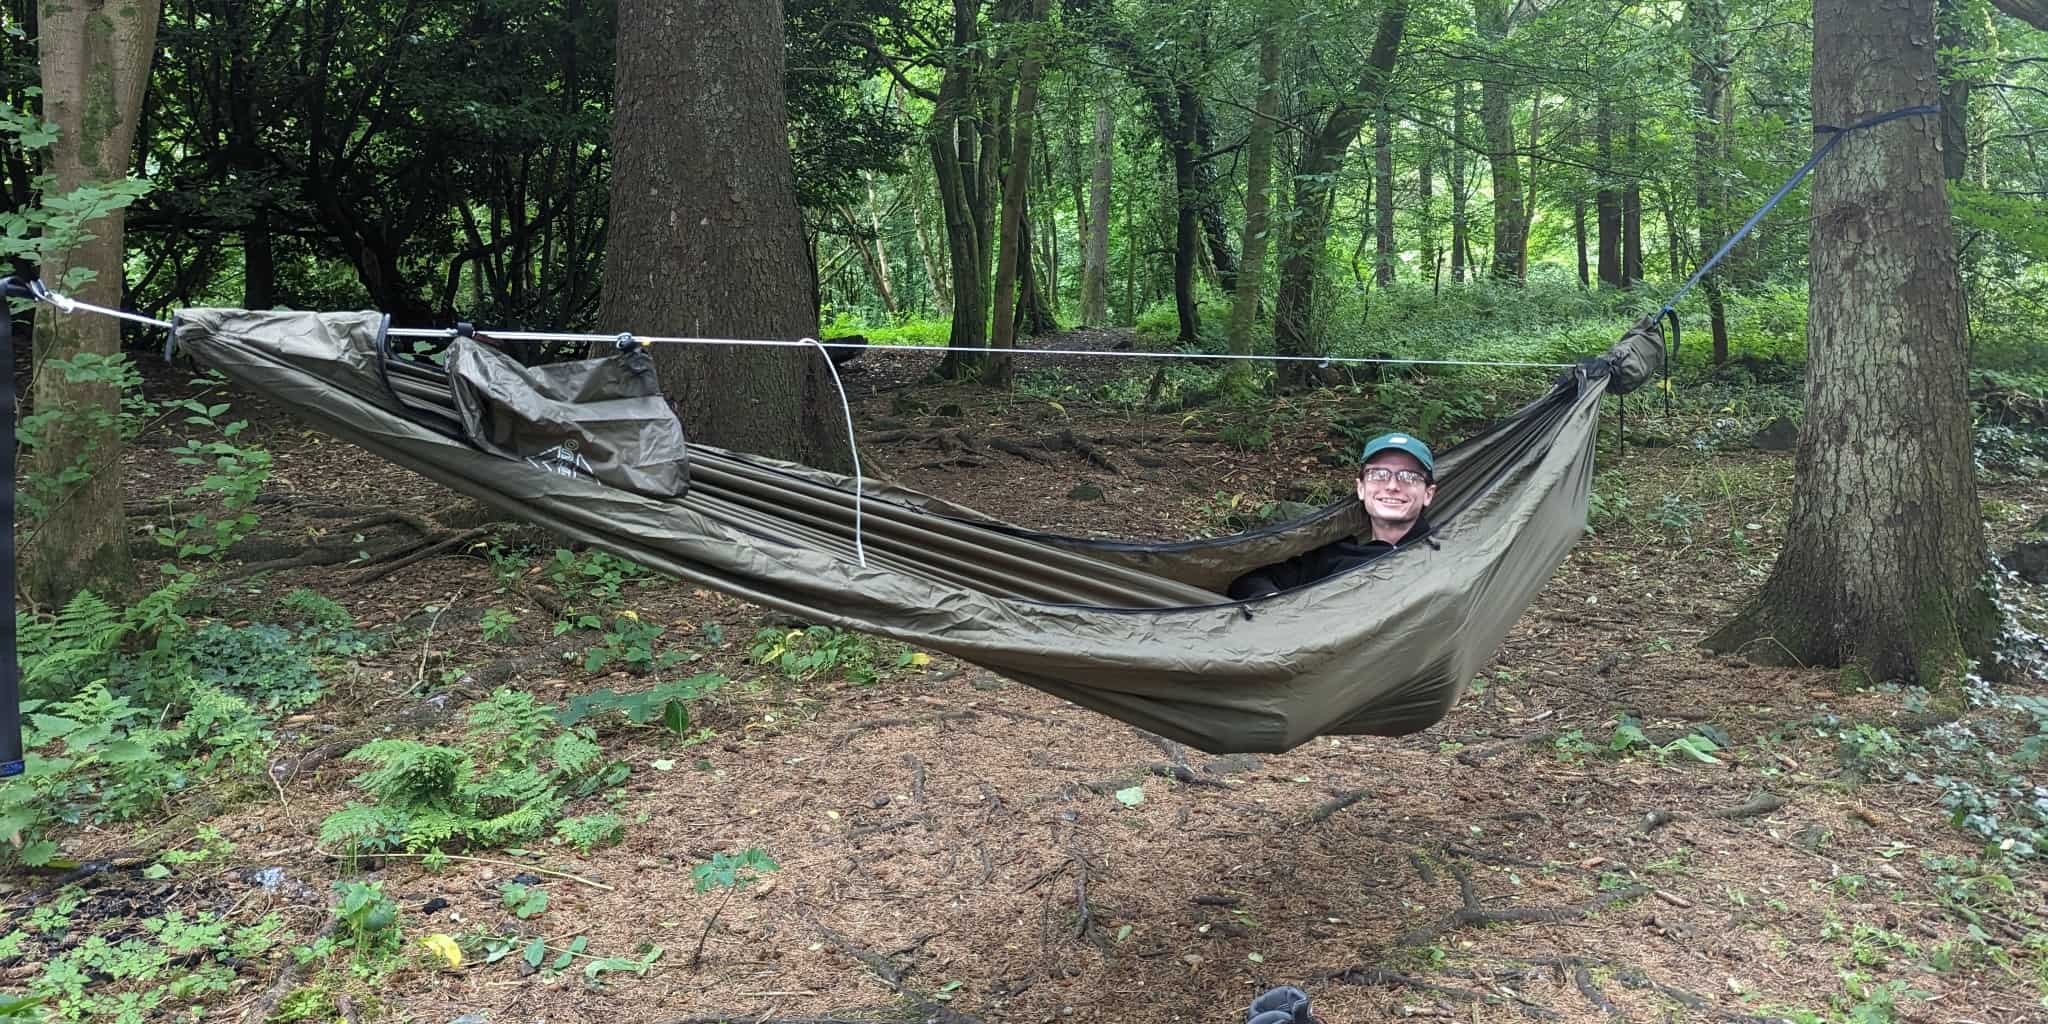 Fraser testing out the Onewind Tempest 12' camping hammock for our review